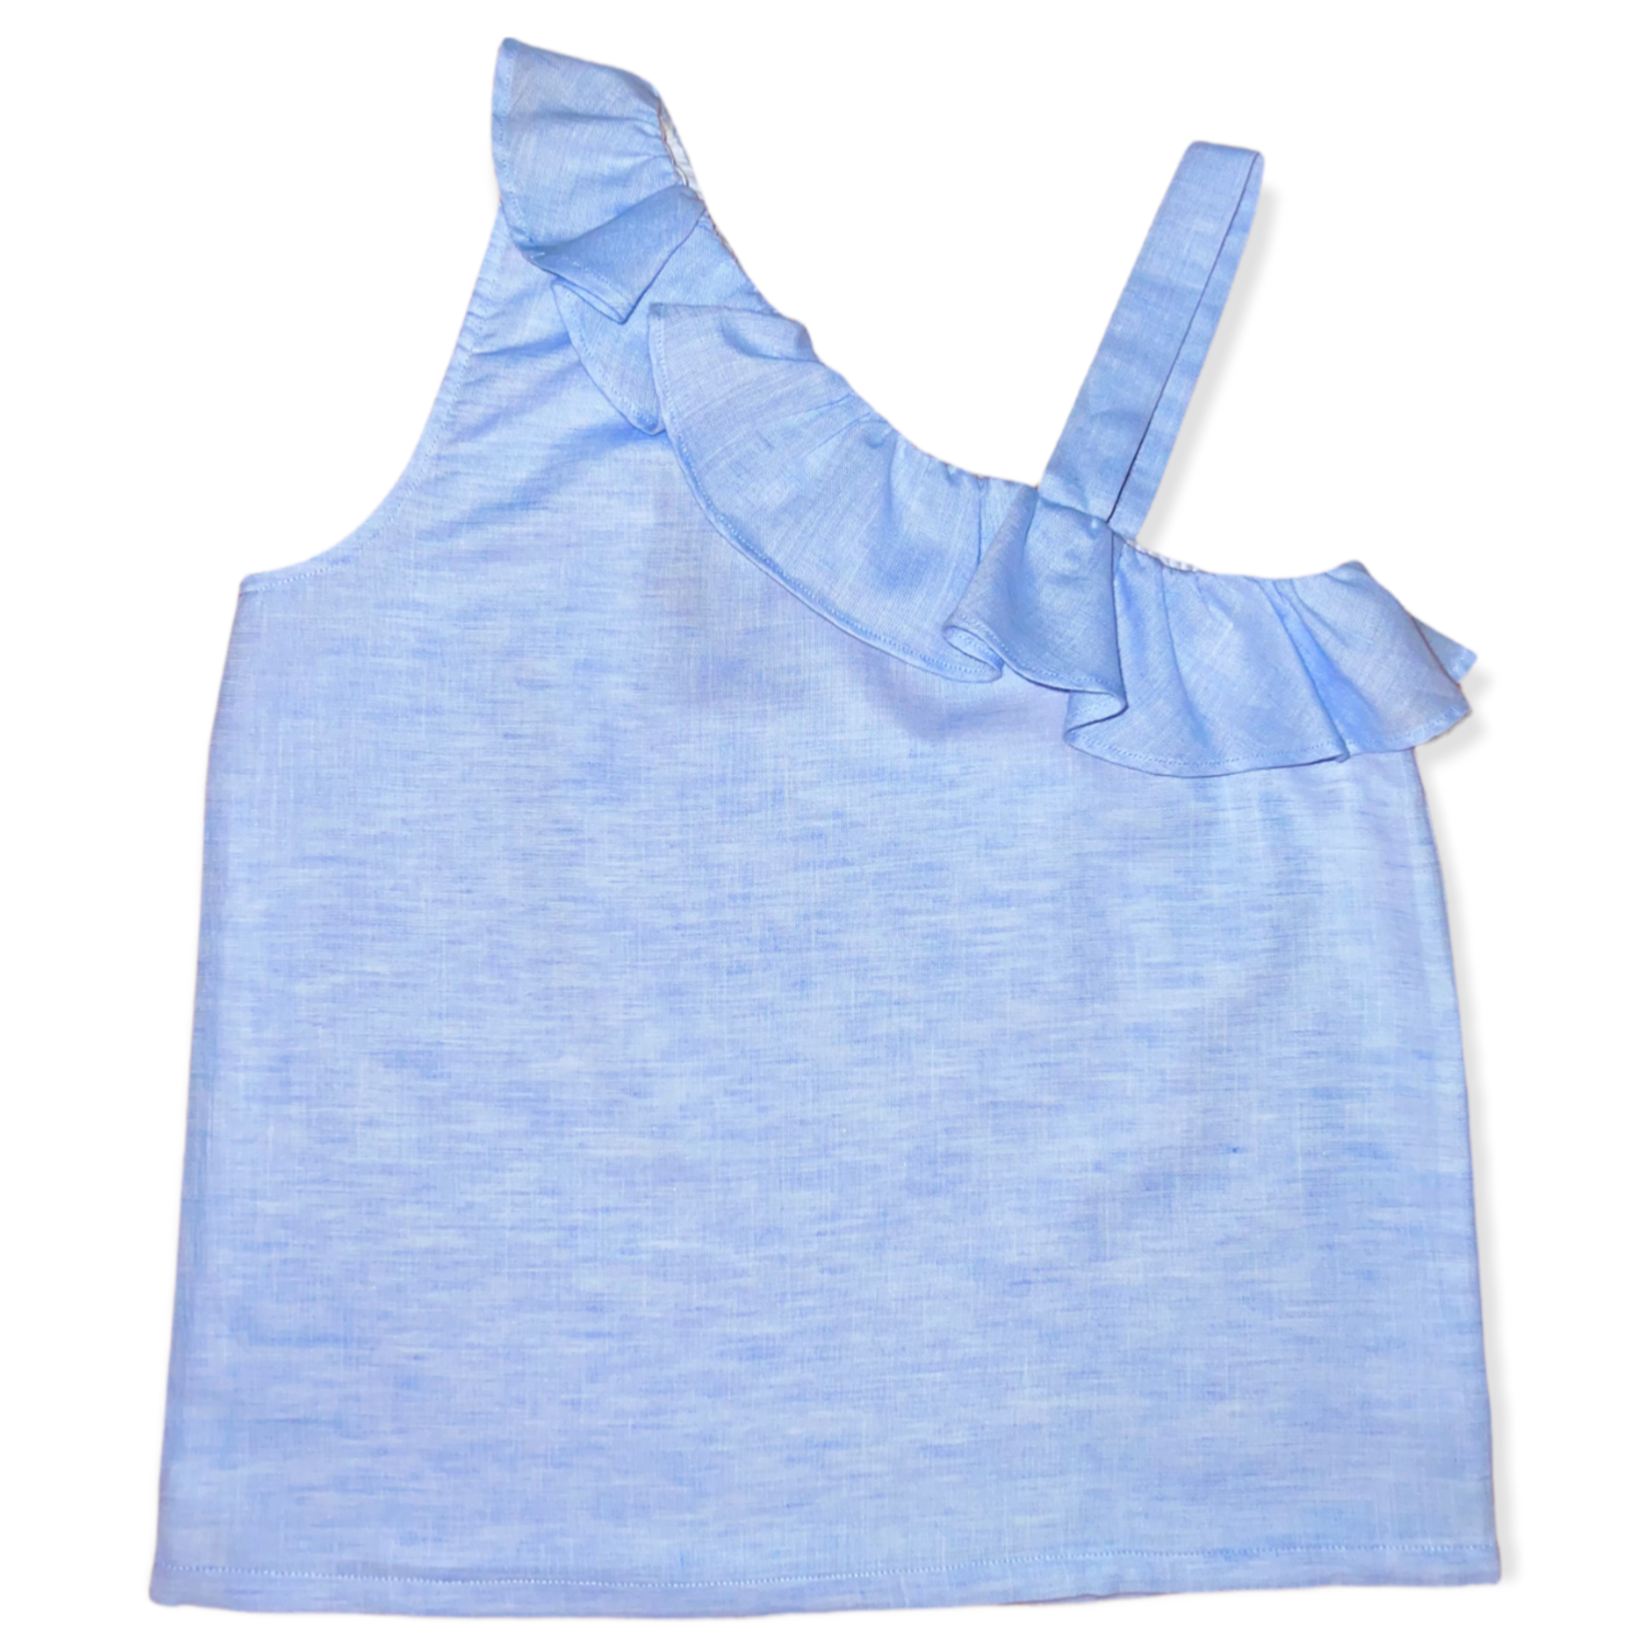 Brown Bowen and Company Brown Bowen and Co. Millie Ruffle Top –Bluffton Blue Linen